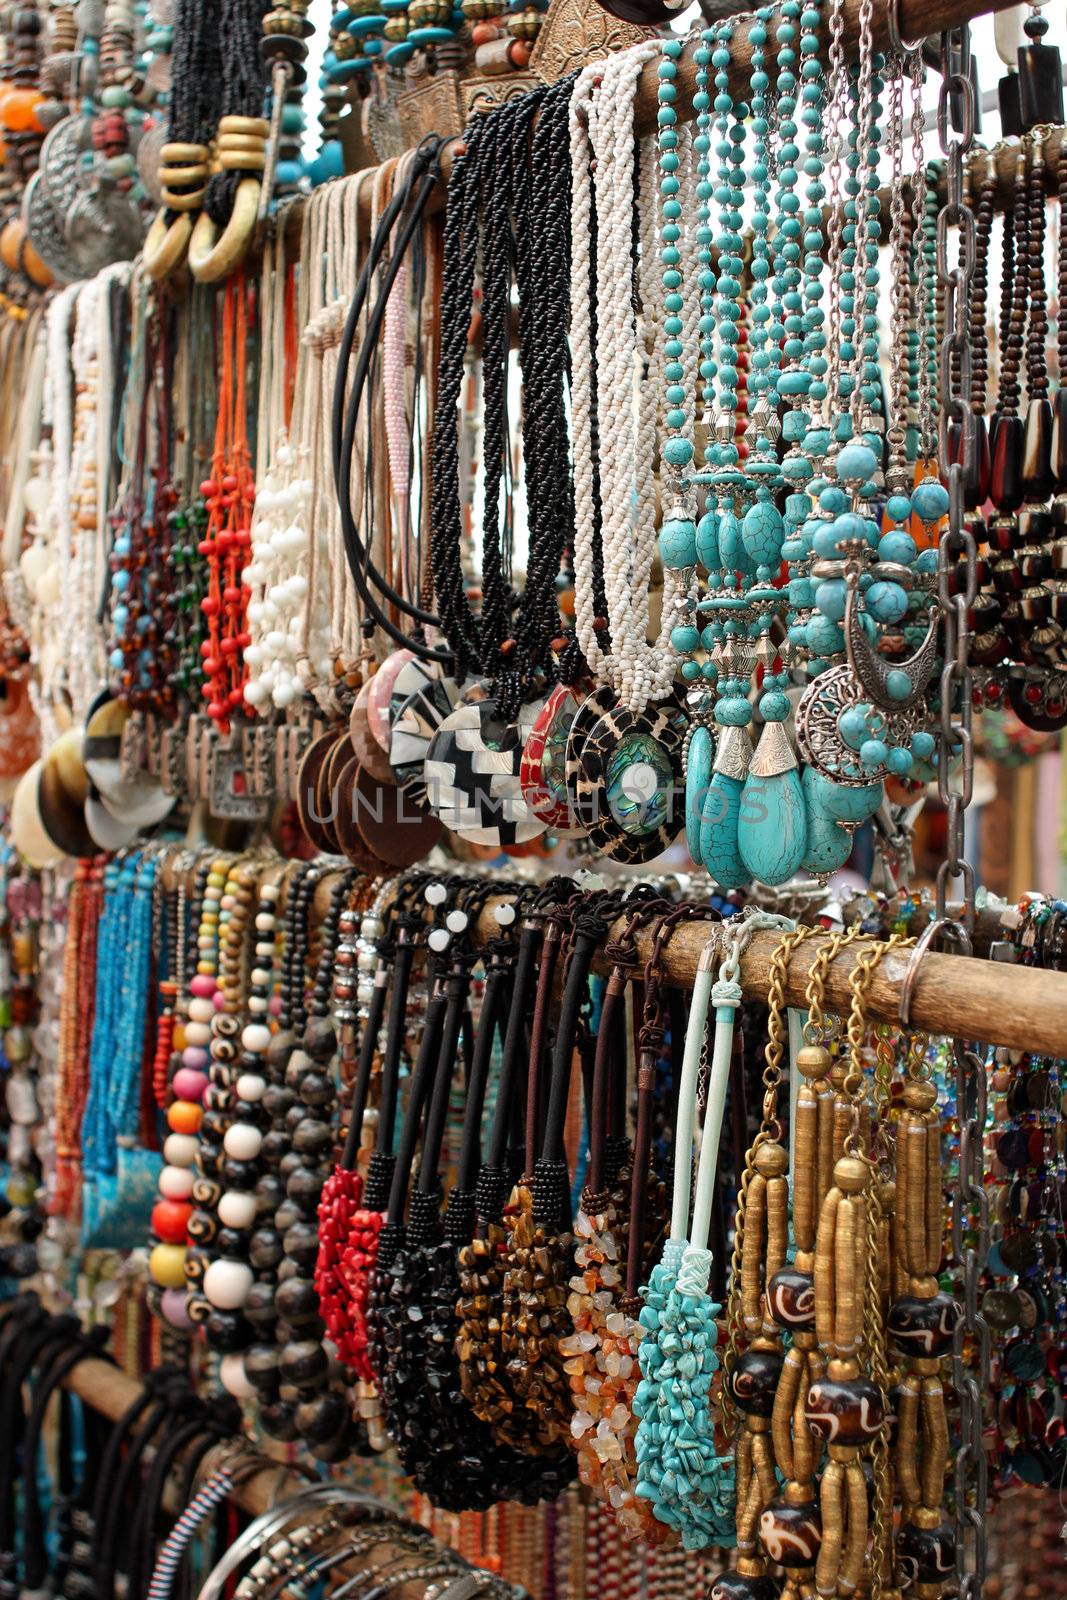 Necklaces for sale at a market